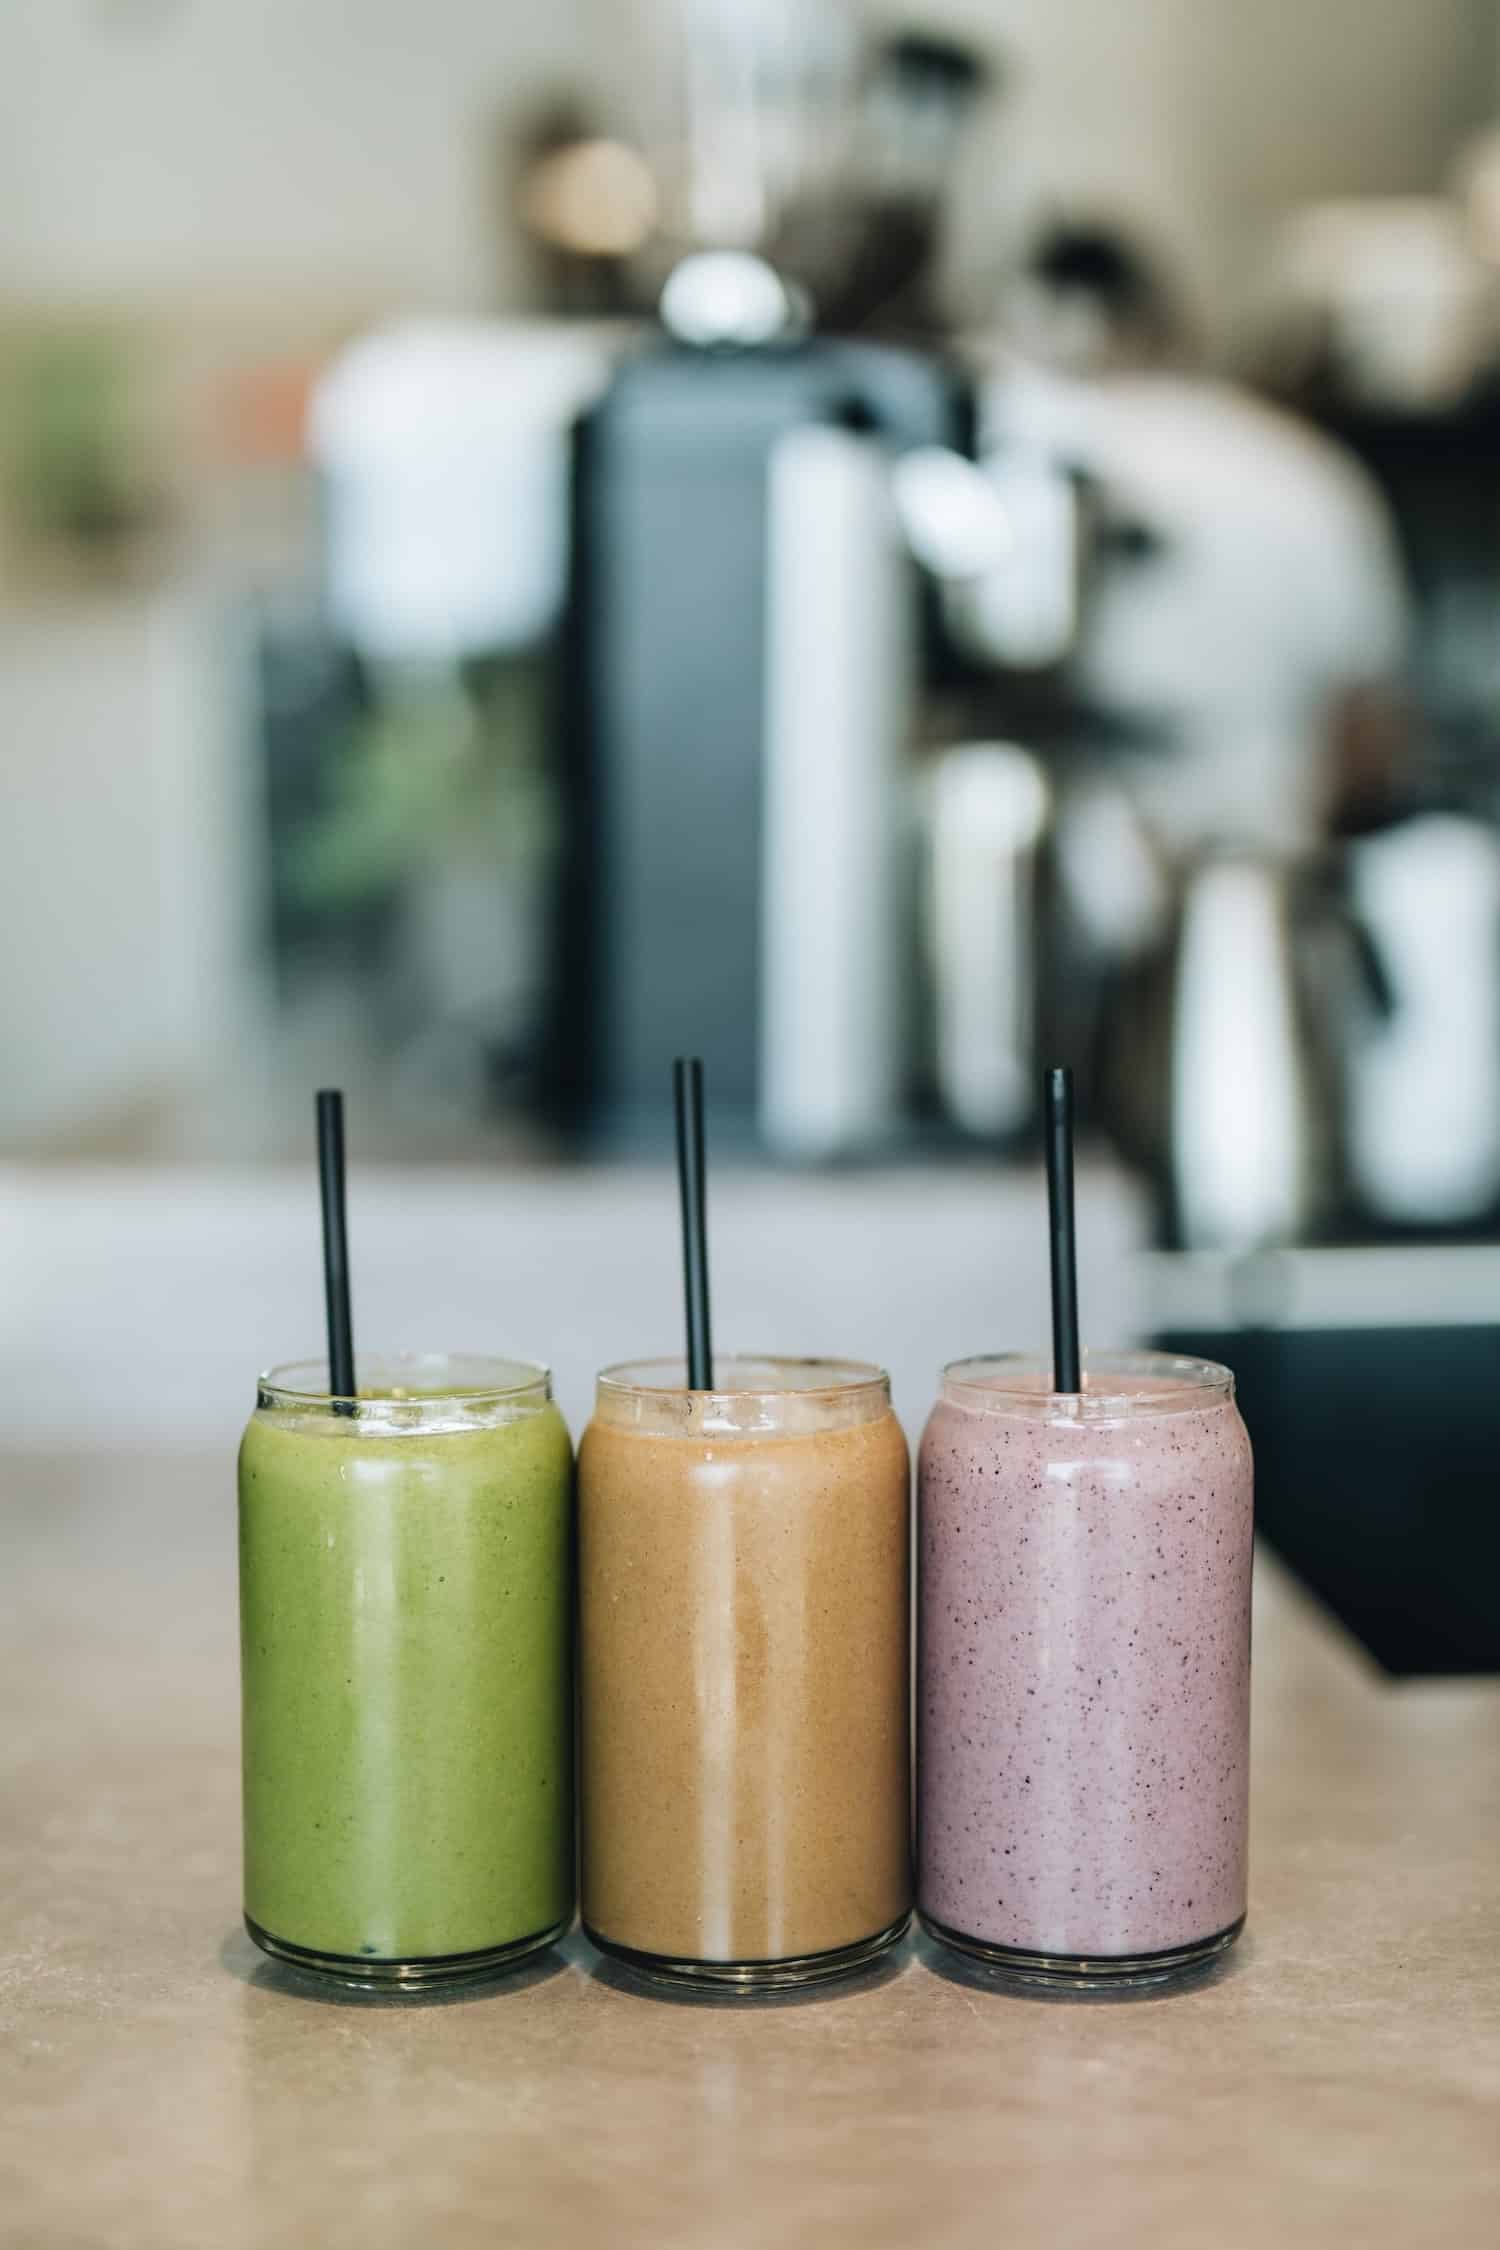 Three smoothies in glass cups with straws, sitting on a counter. Green smoothie, brown smoothie, and purple smoothie are displayed.